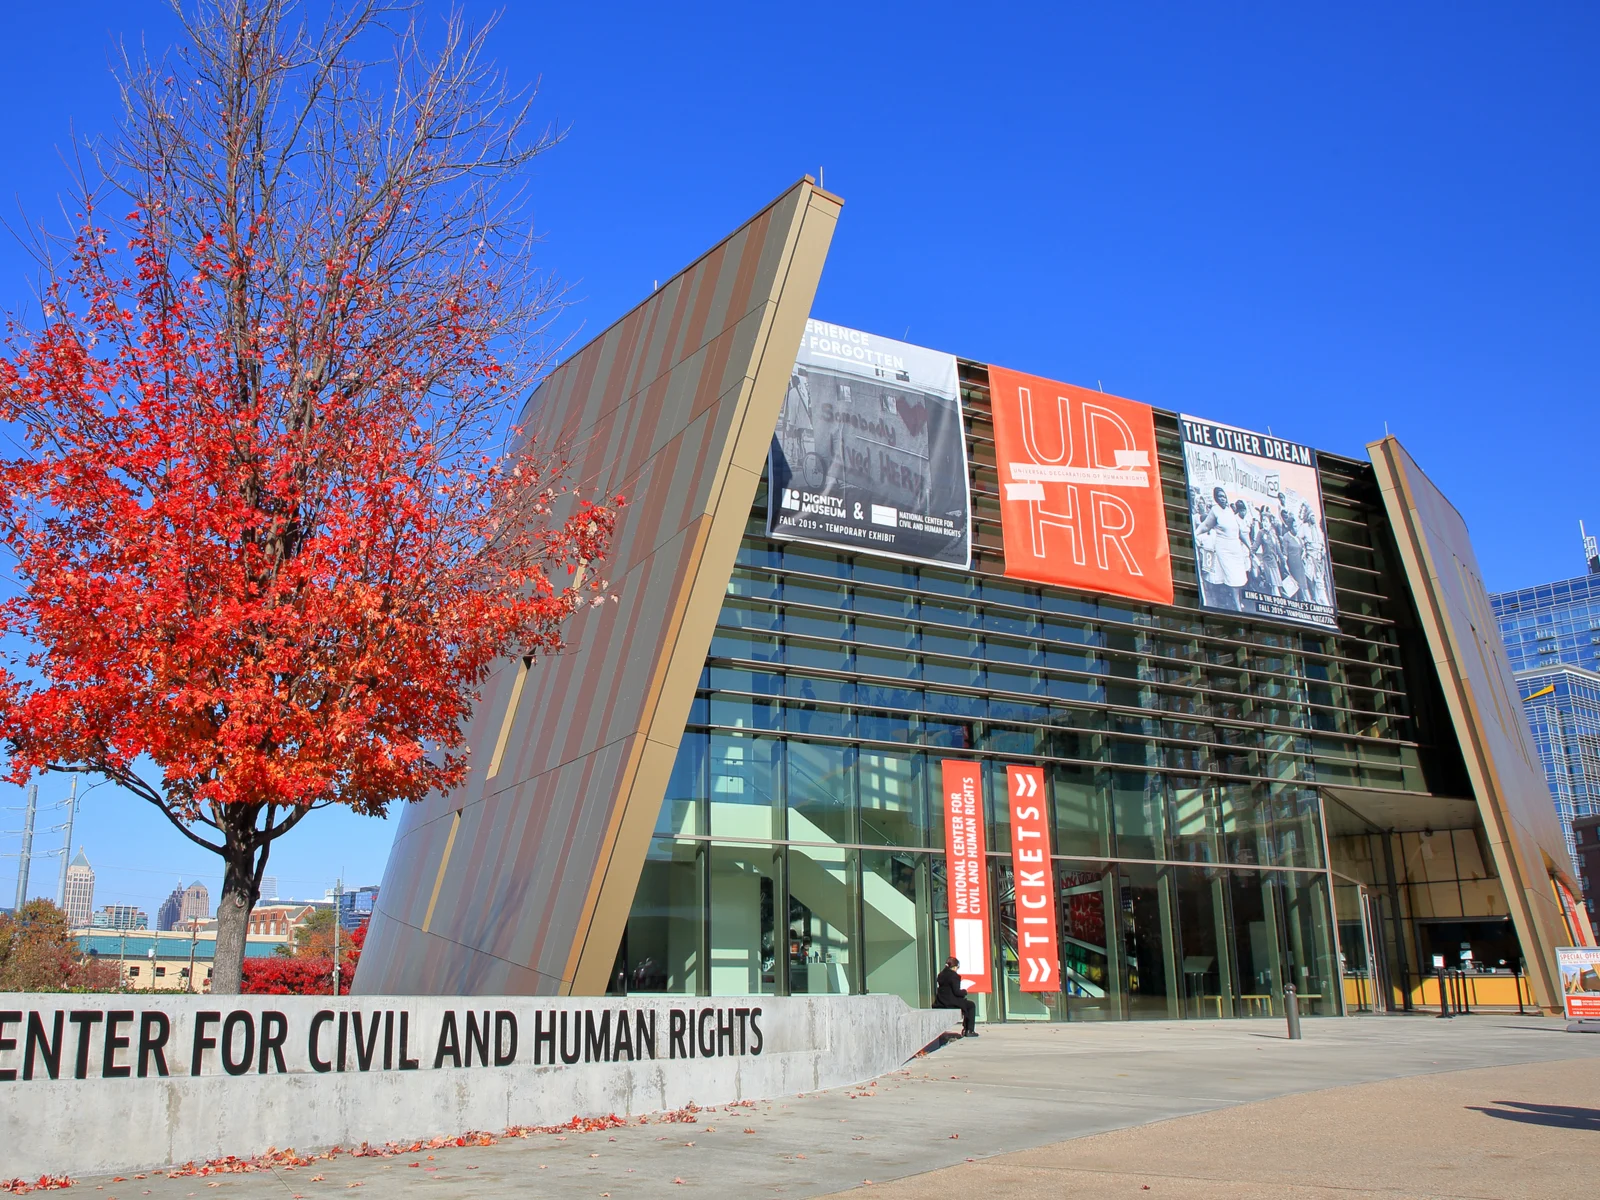 National center for civil and human rights, one of the best attractions to see in Atlanta